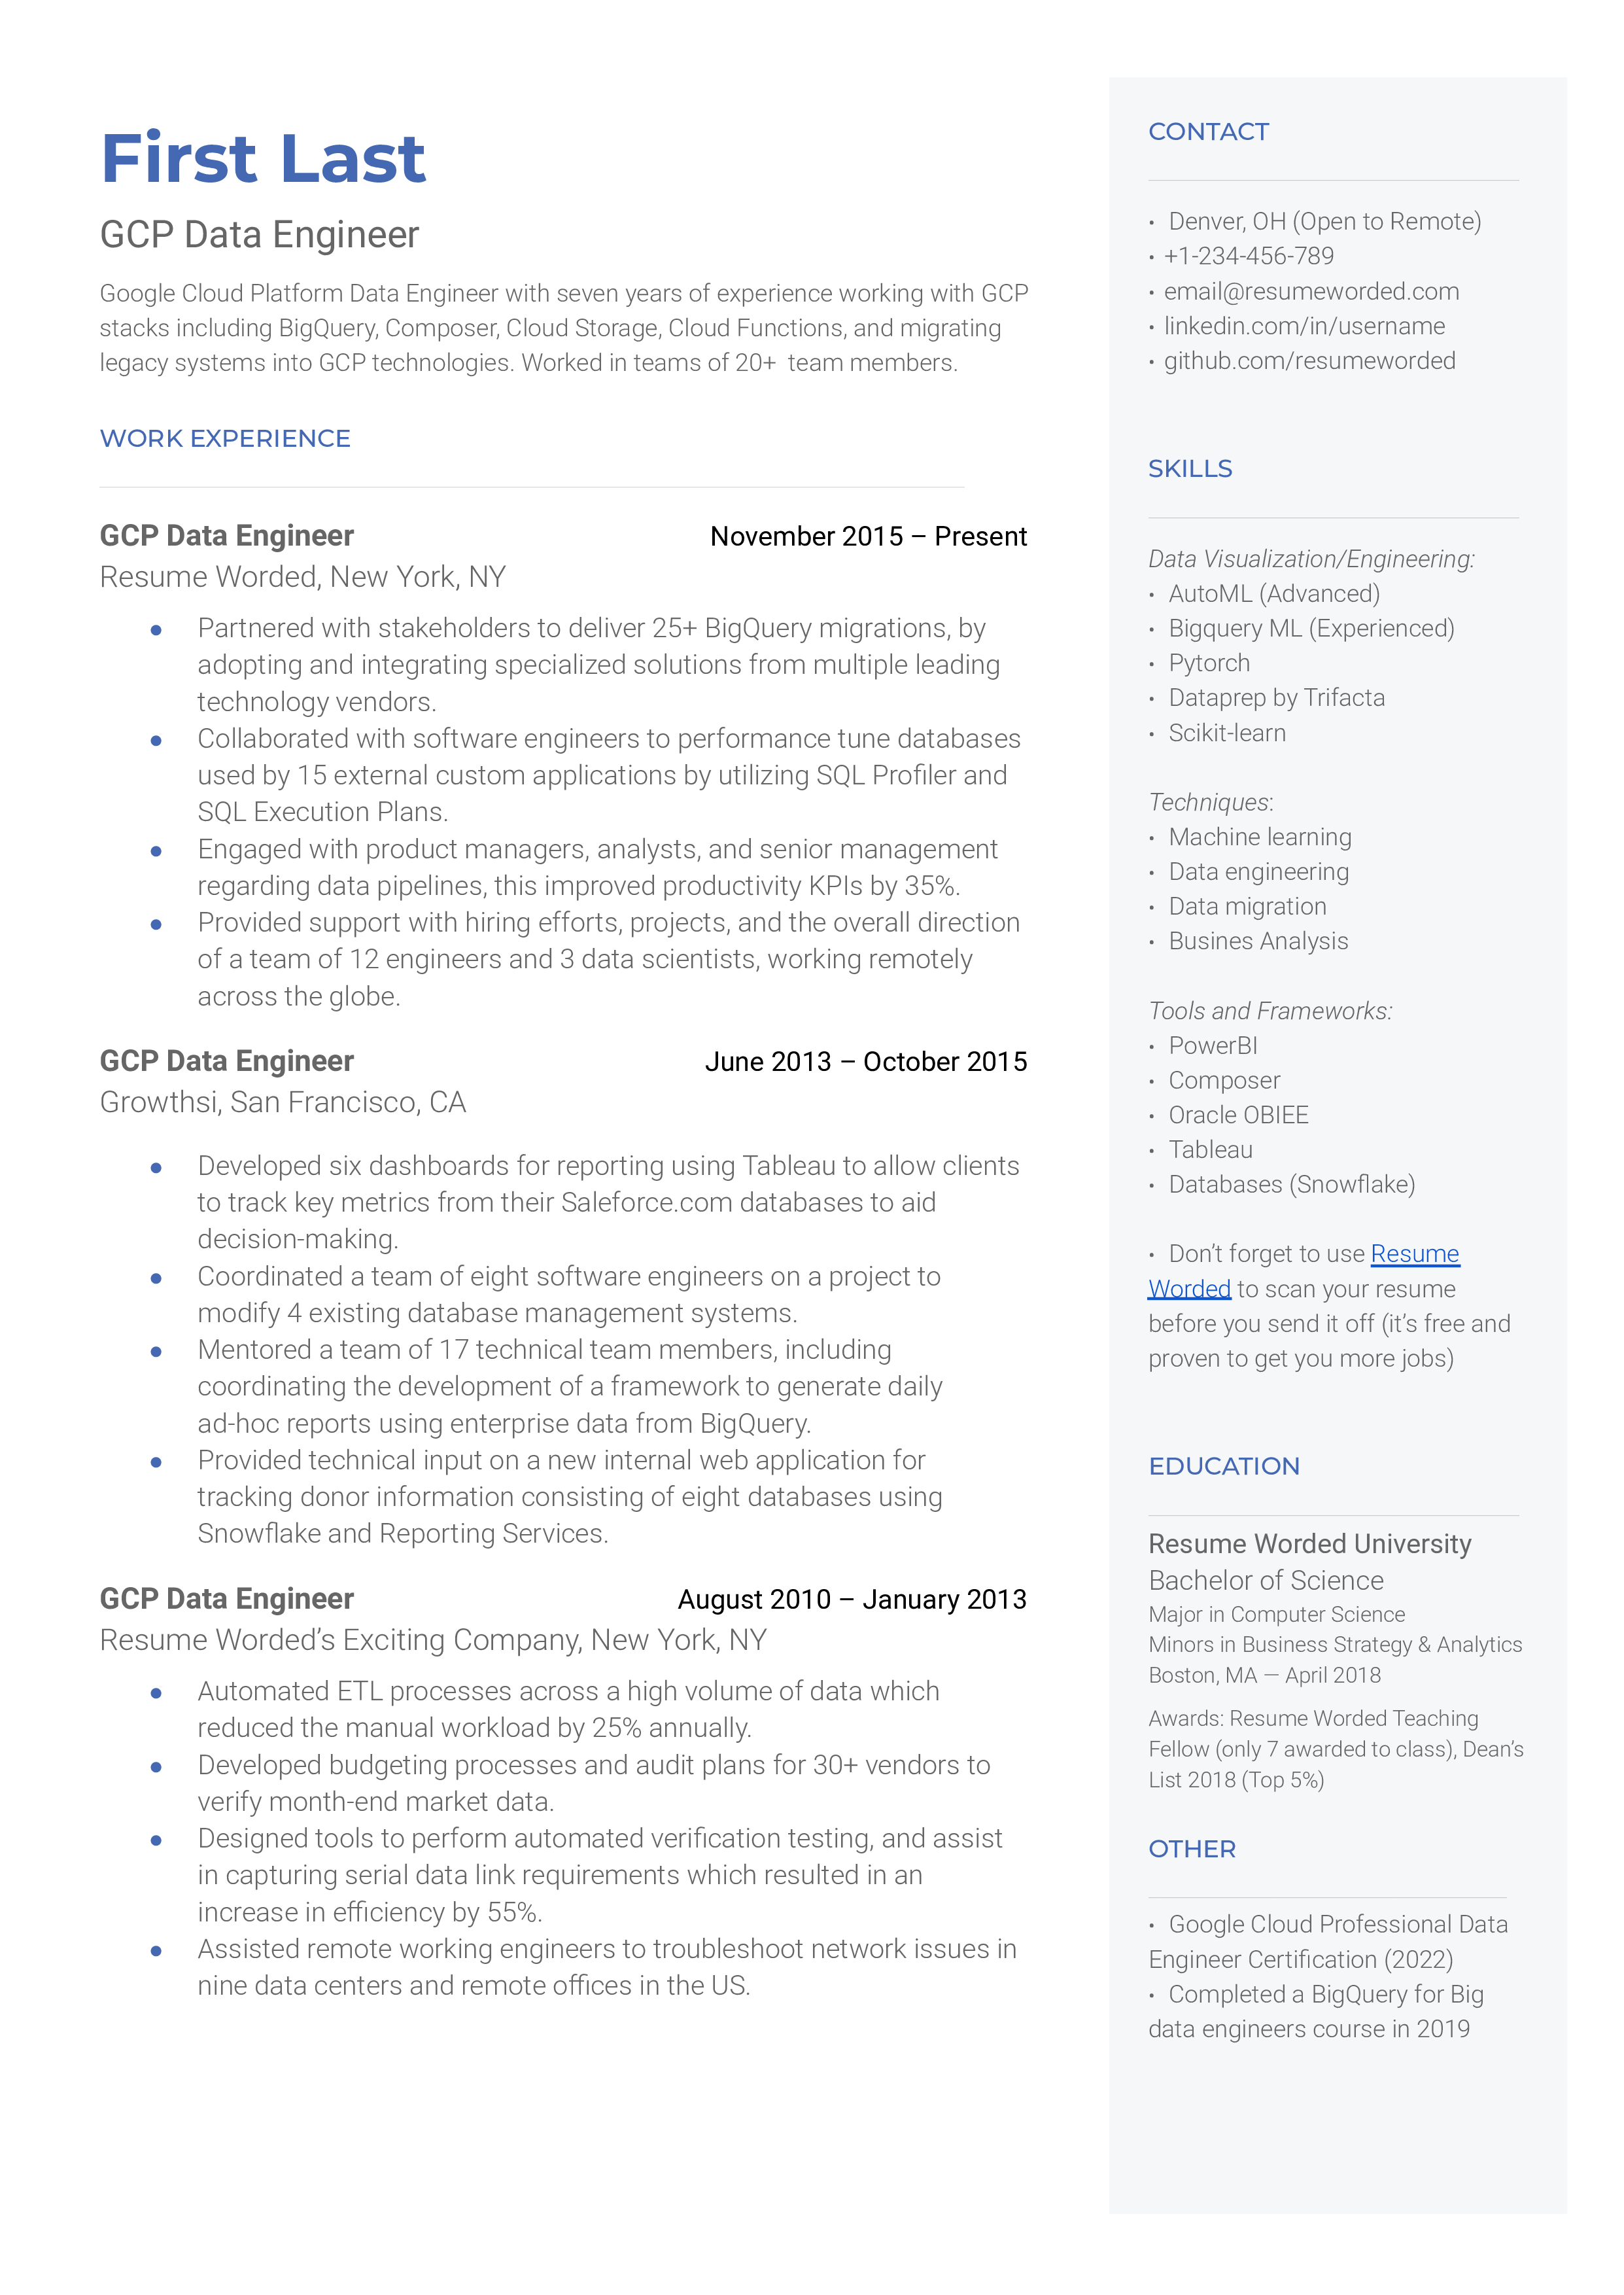 A GCP data engineer resume sample that highlights the applicant’s GCP certification and extensive experience.